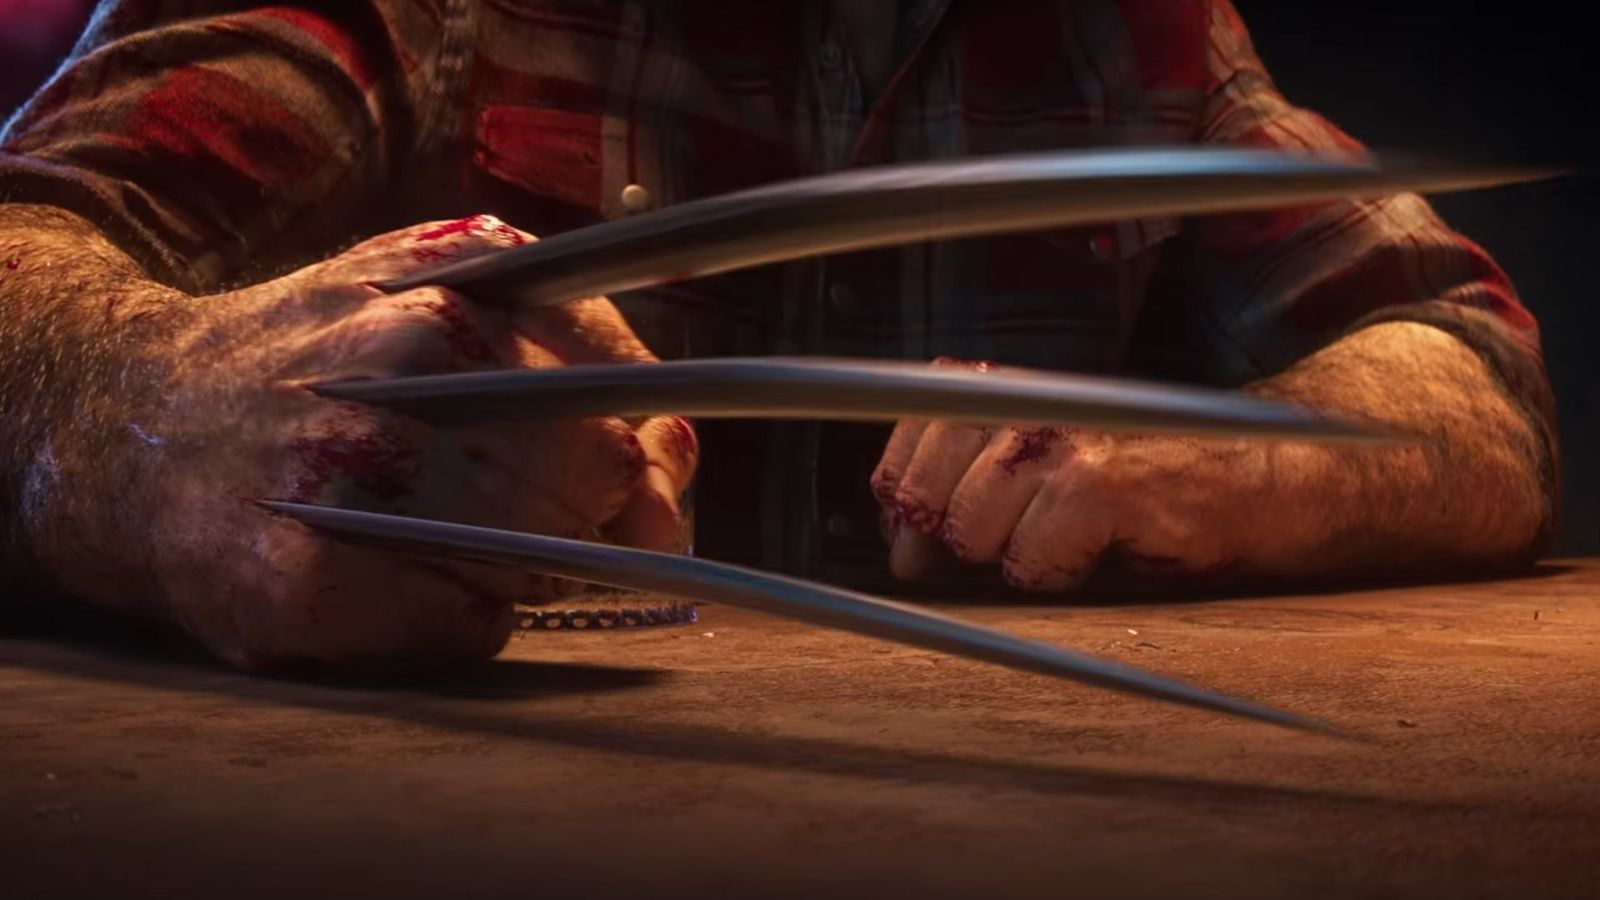 Wolverine's bloody hand with claws protruding